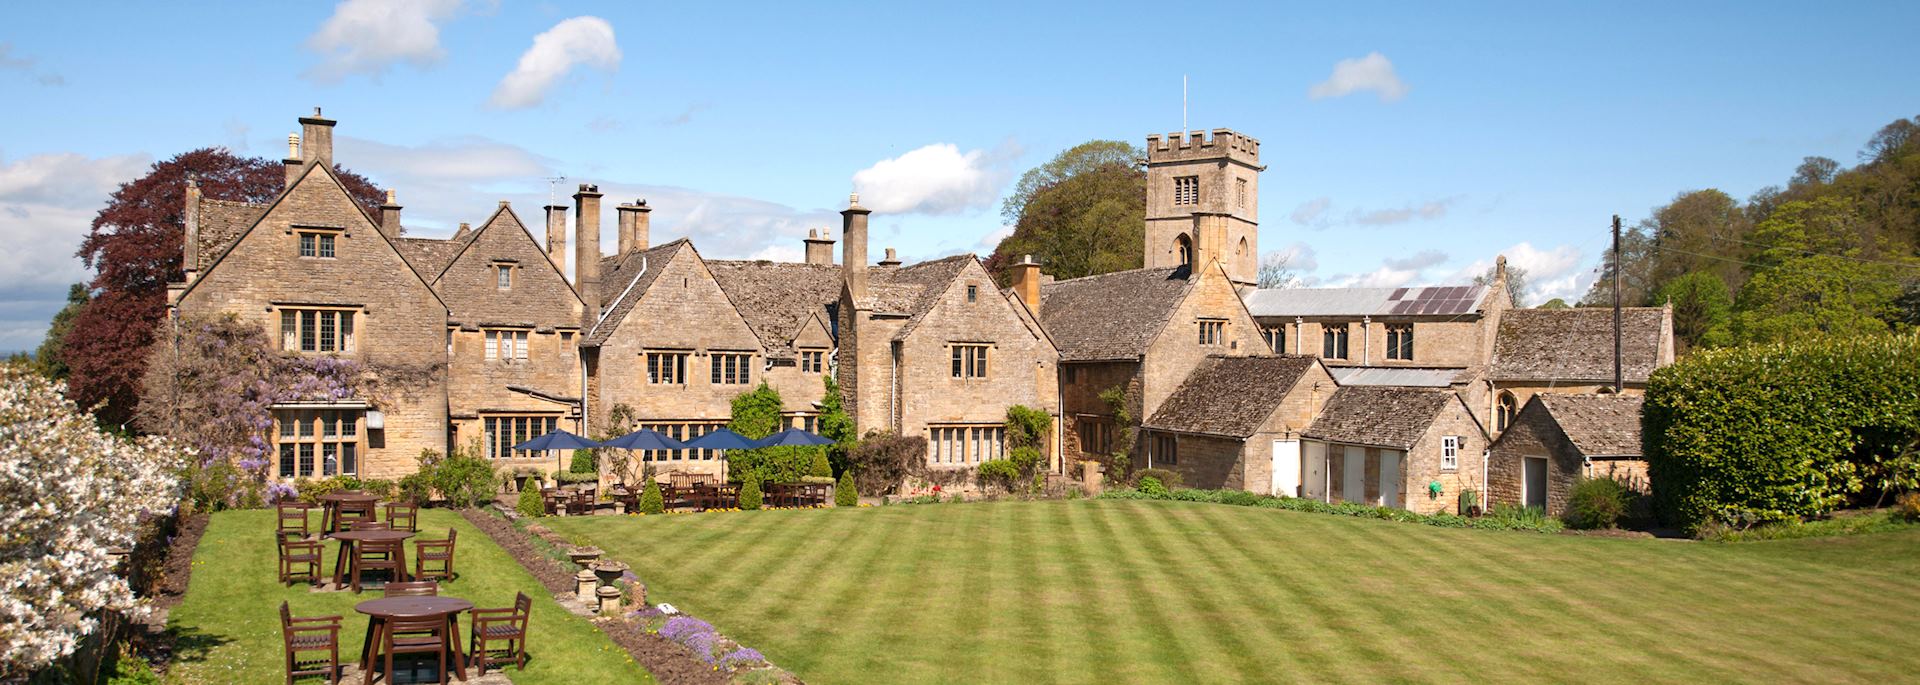 Buckland Manor, Cotswolds